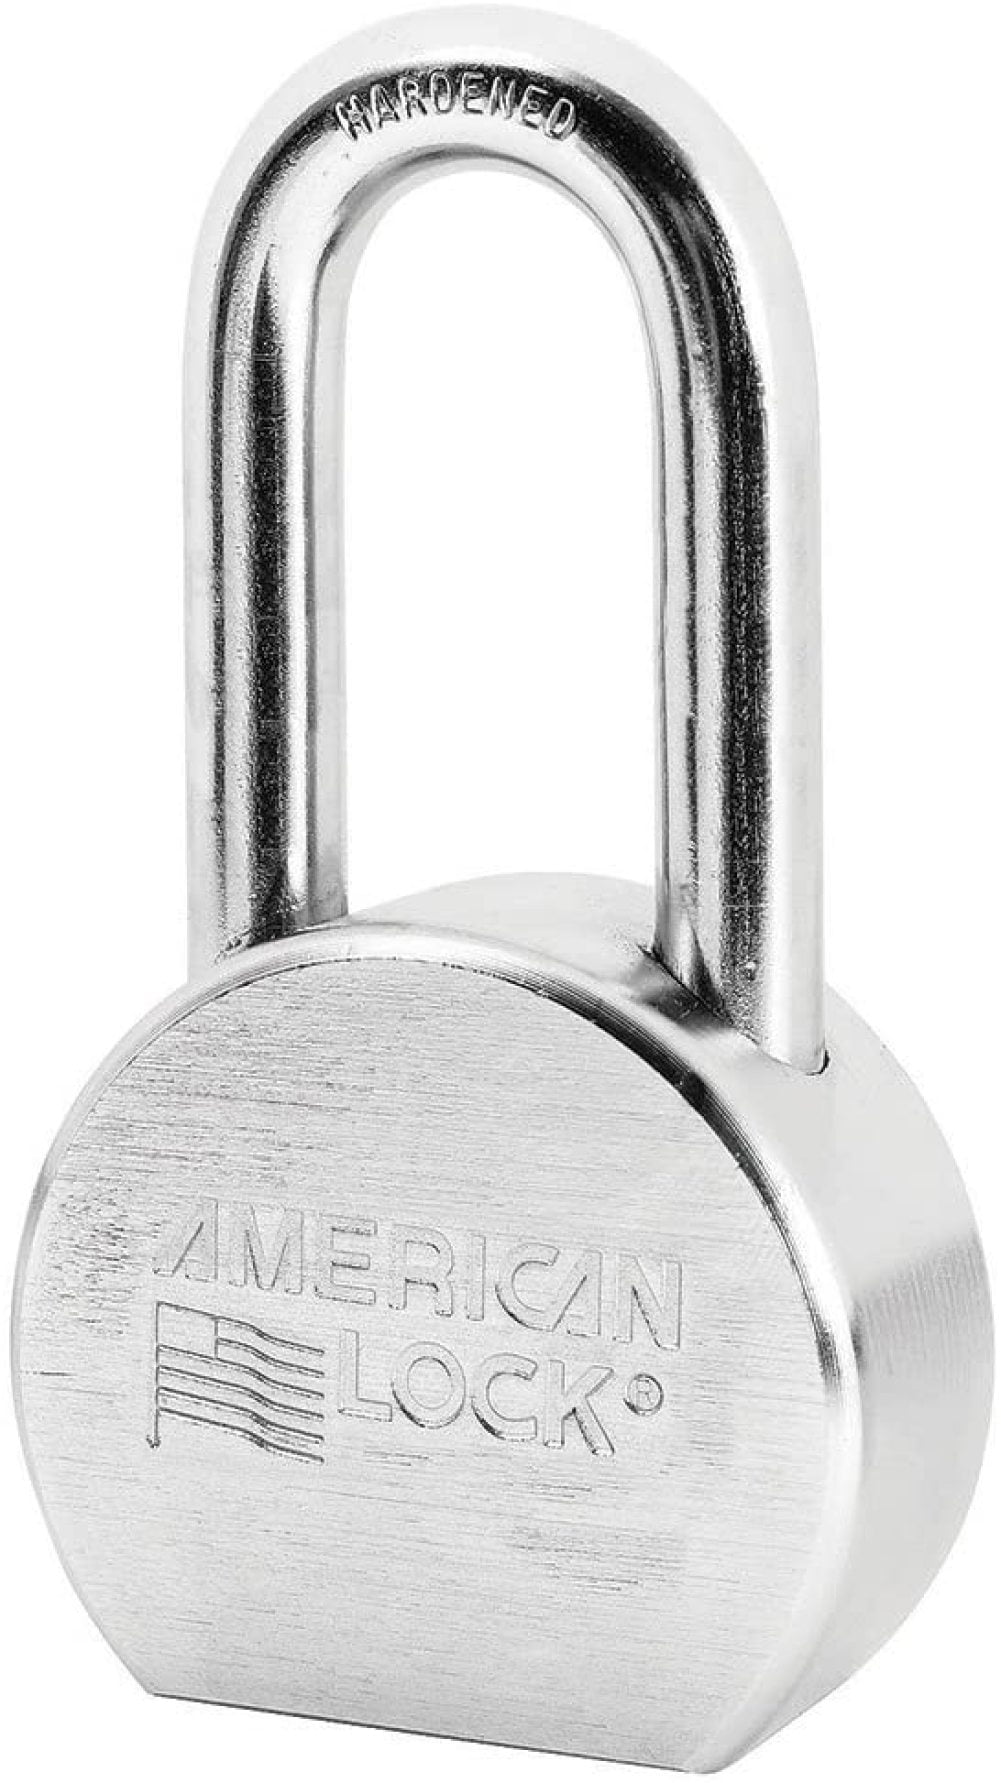 2  American Series 1300 2" Padlock serviced  A-1 Condition Duranodic 